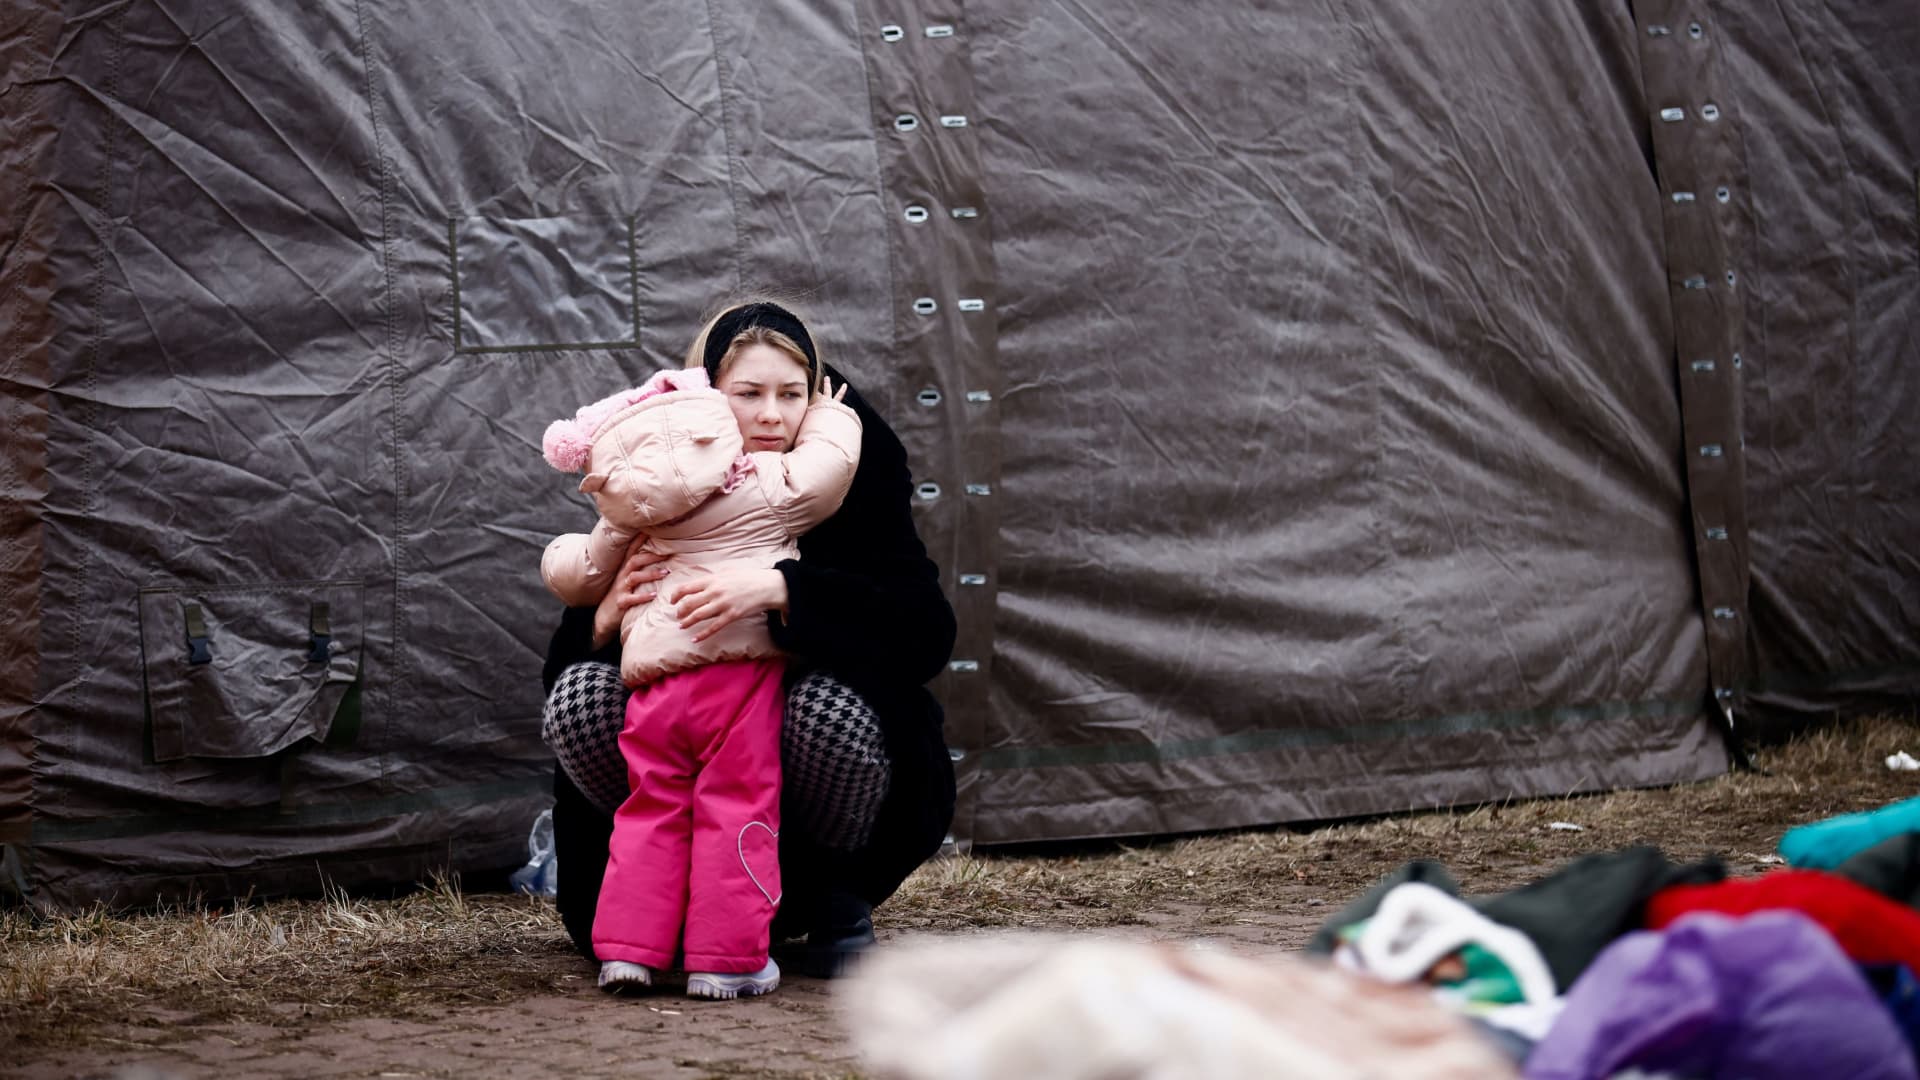 A woman fleeing Russian invasion of Ukraine hugs a child at a temporary camp in Przemysl, Poland, February 28, 2022.